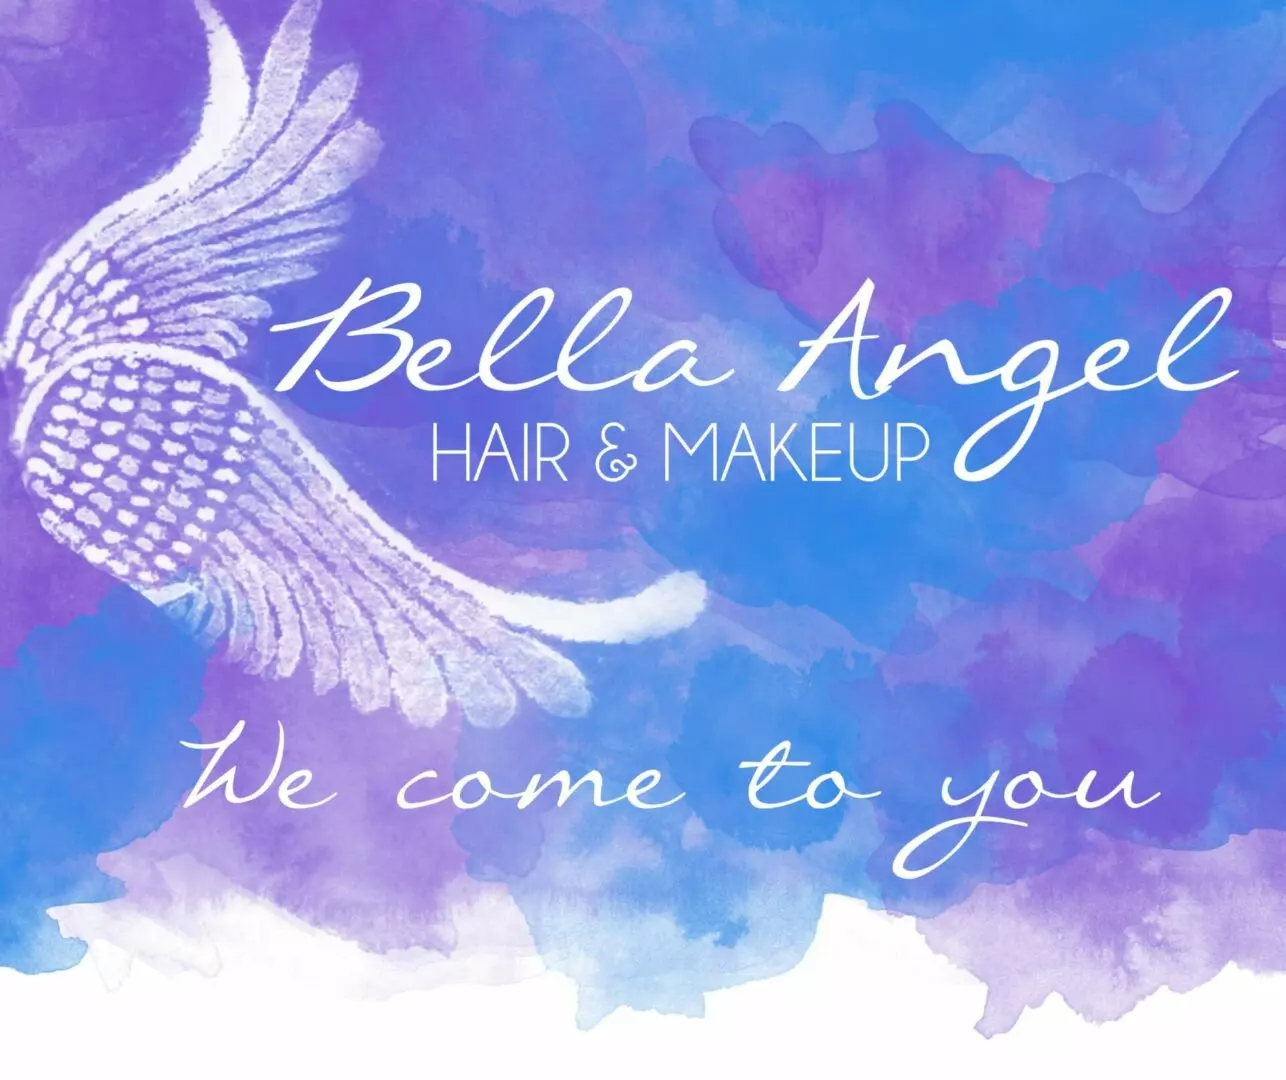 bella angel retractable banners-FINAL-removed box (3)